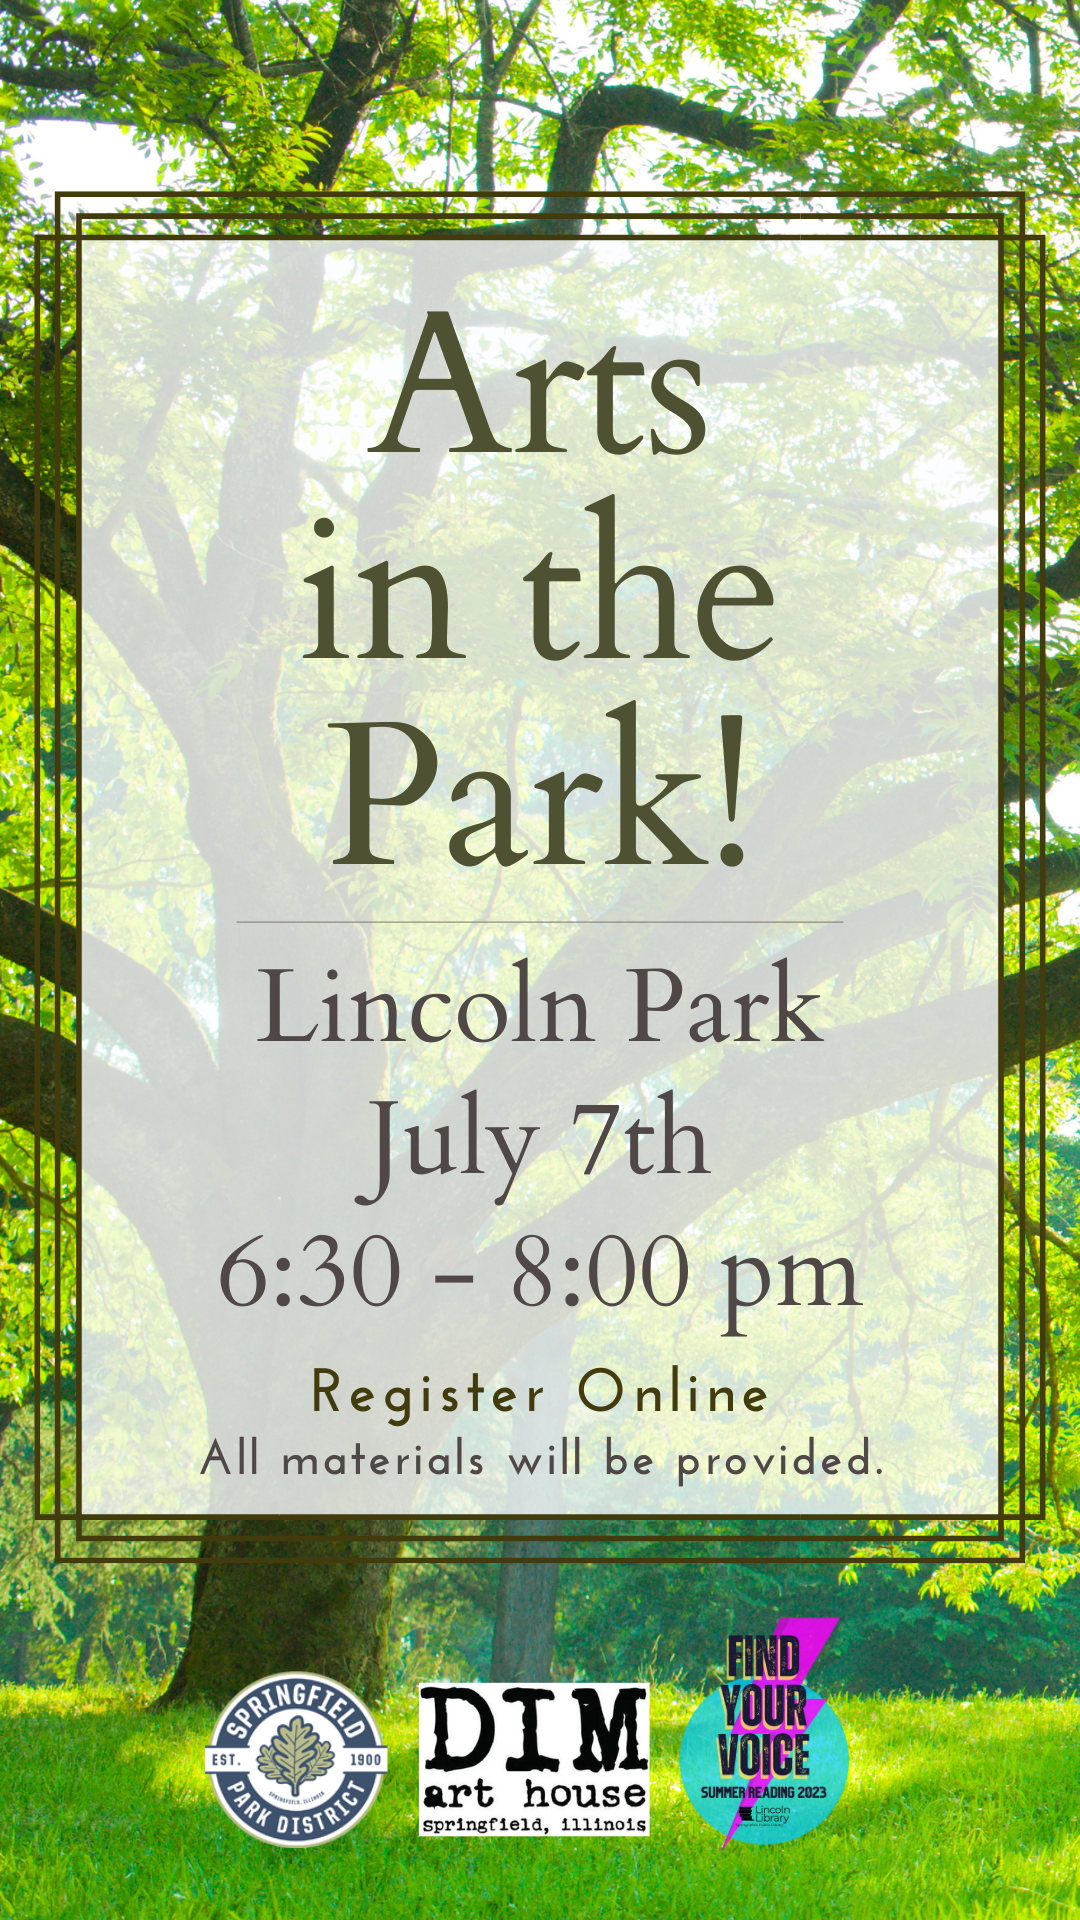 Arts in the Park!